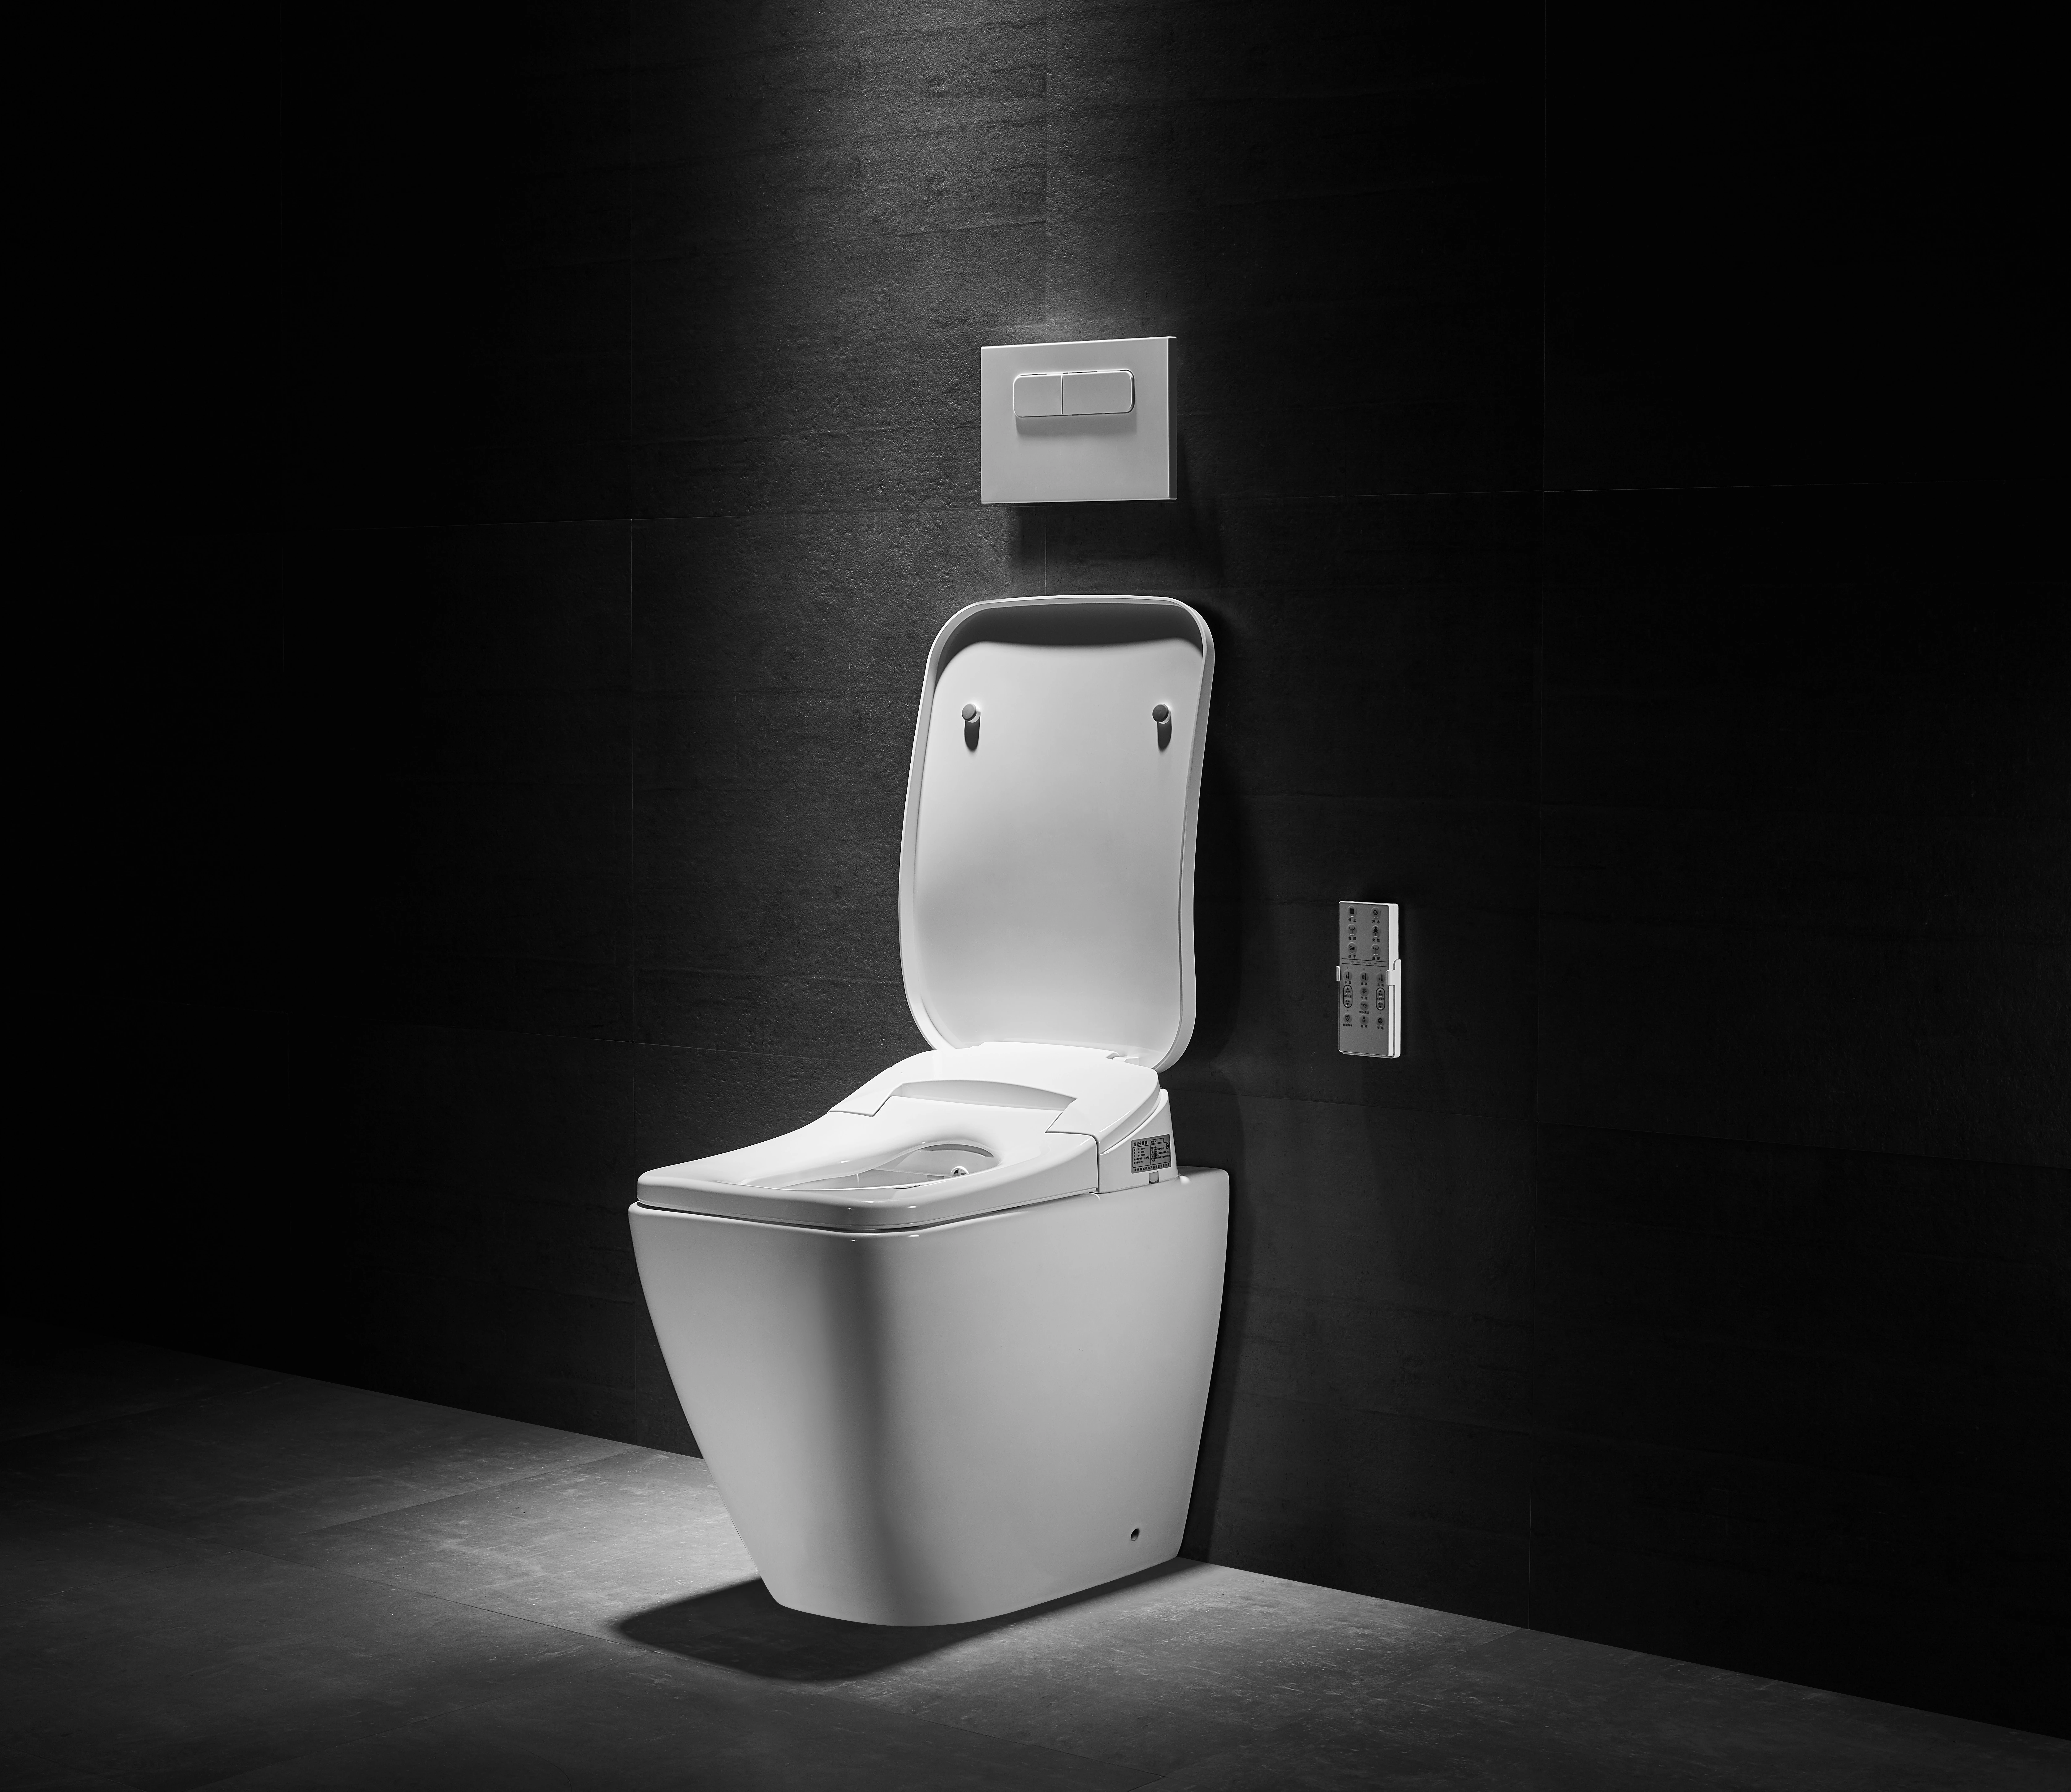 Smart toilet ceramic toilet with built-in water tank, toilet sensor flushing, automatic clamshell household integrated